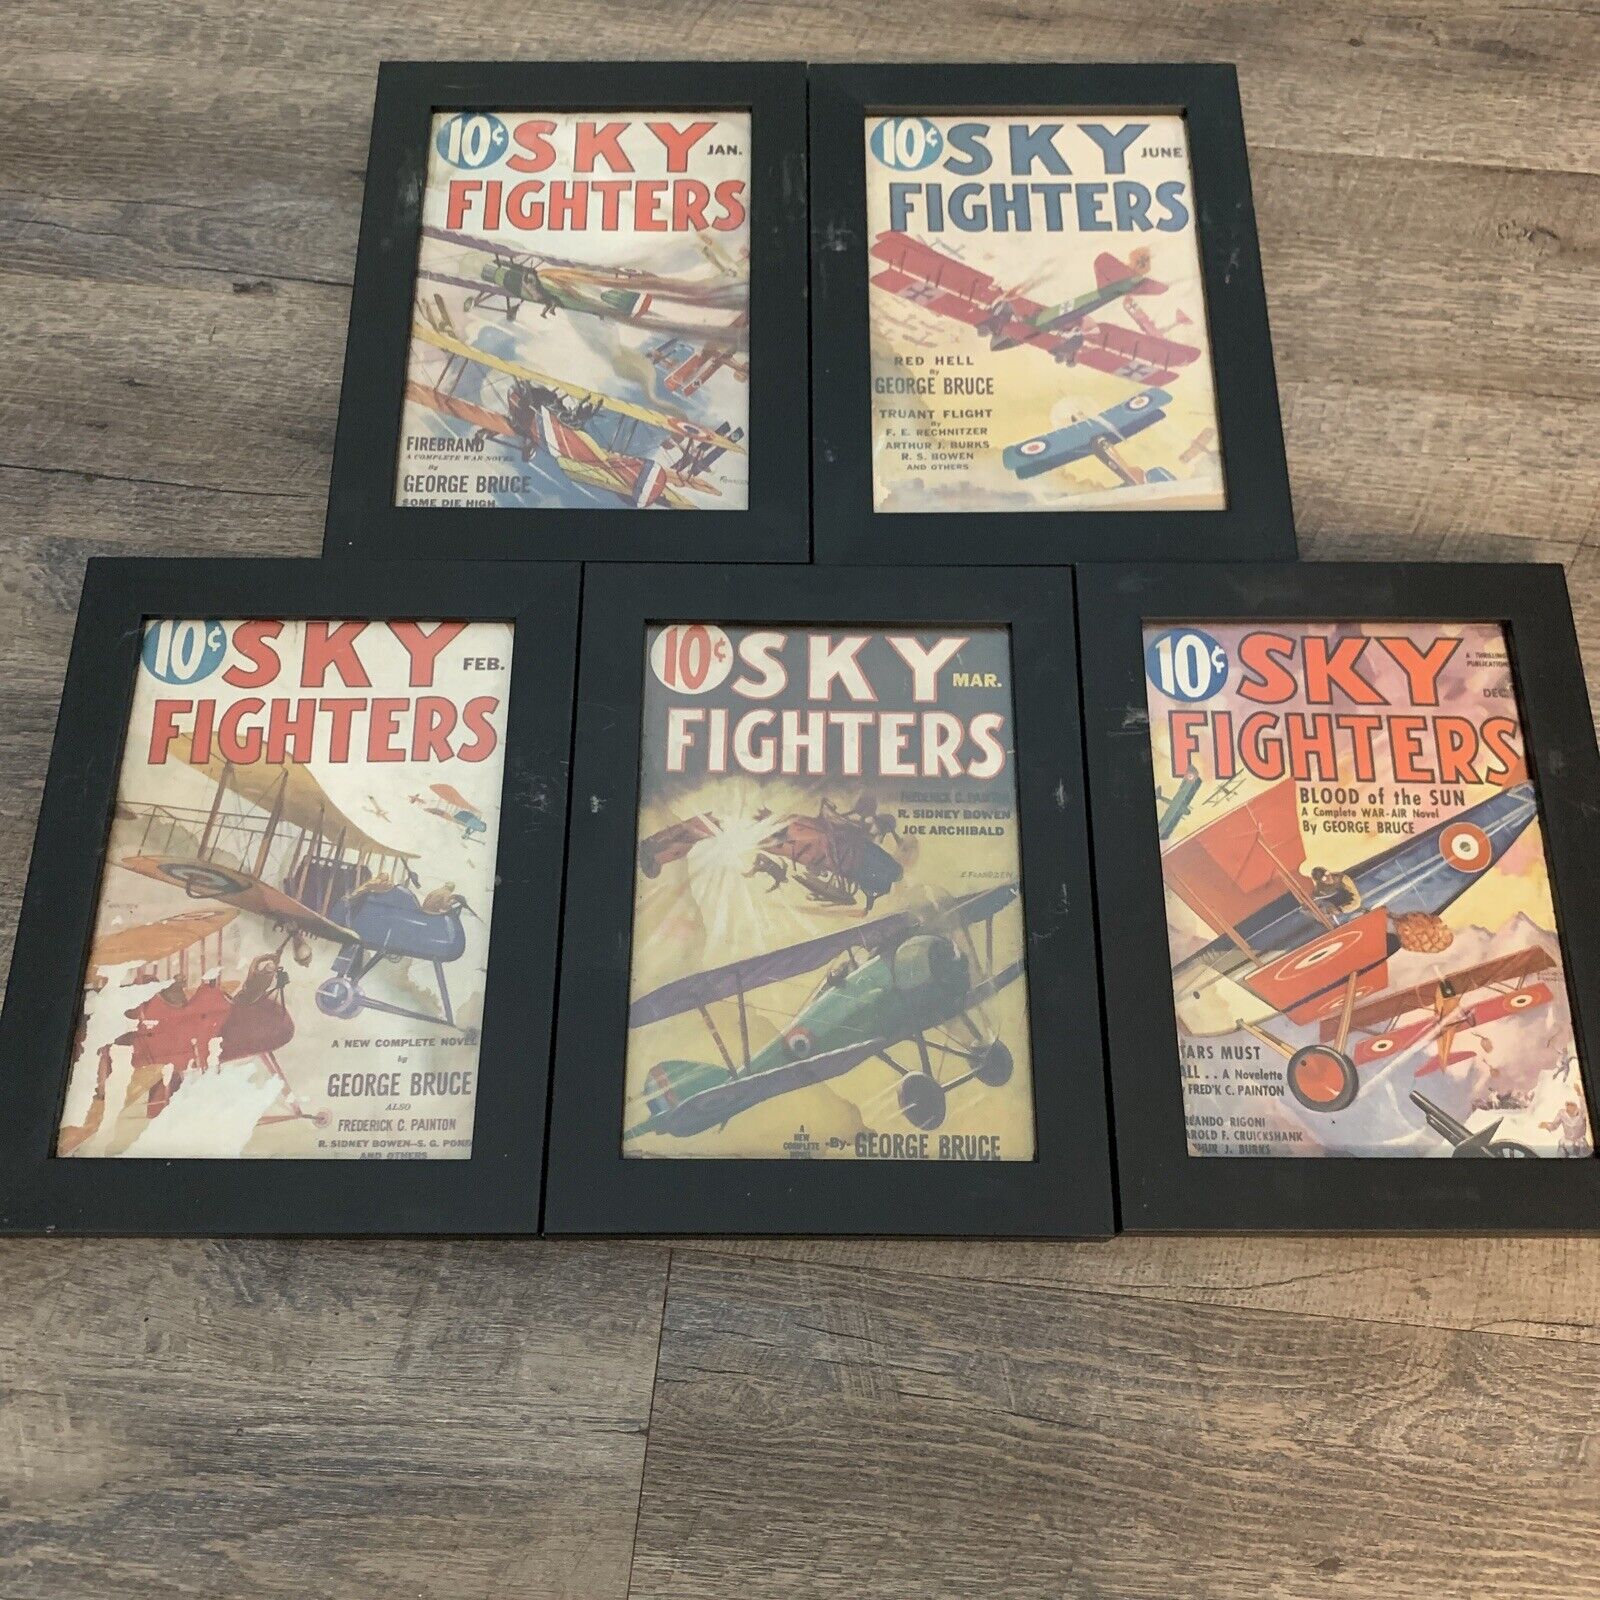 5 professionally framed SKY FIGHTERS comic books